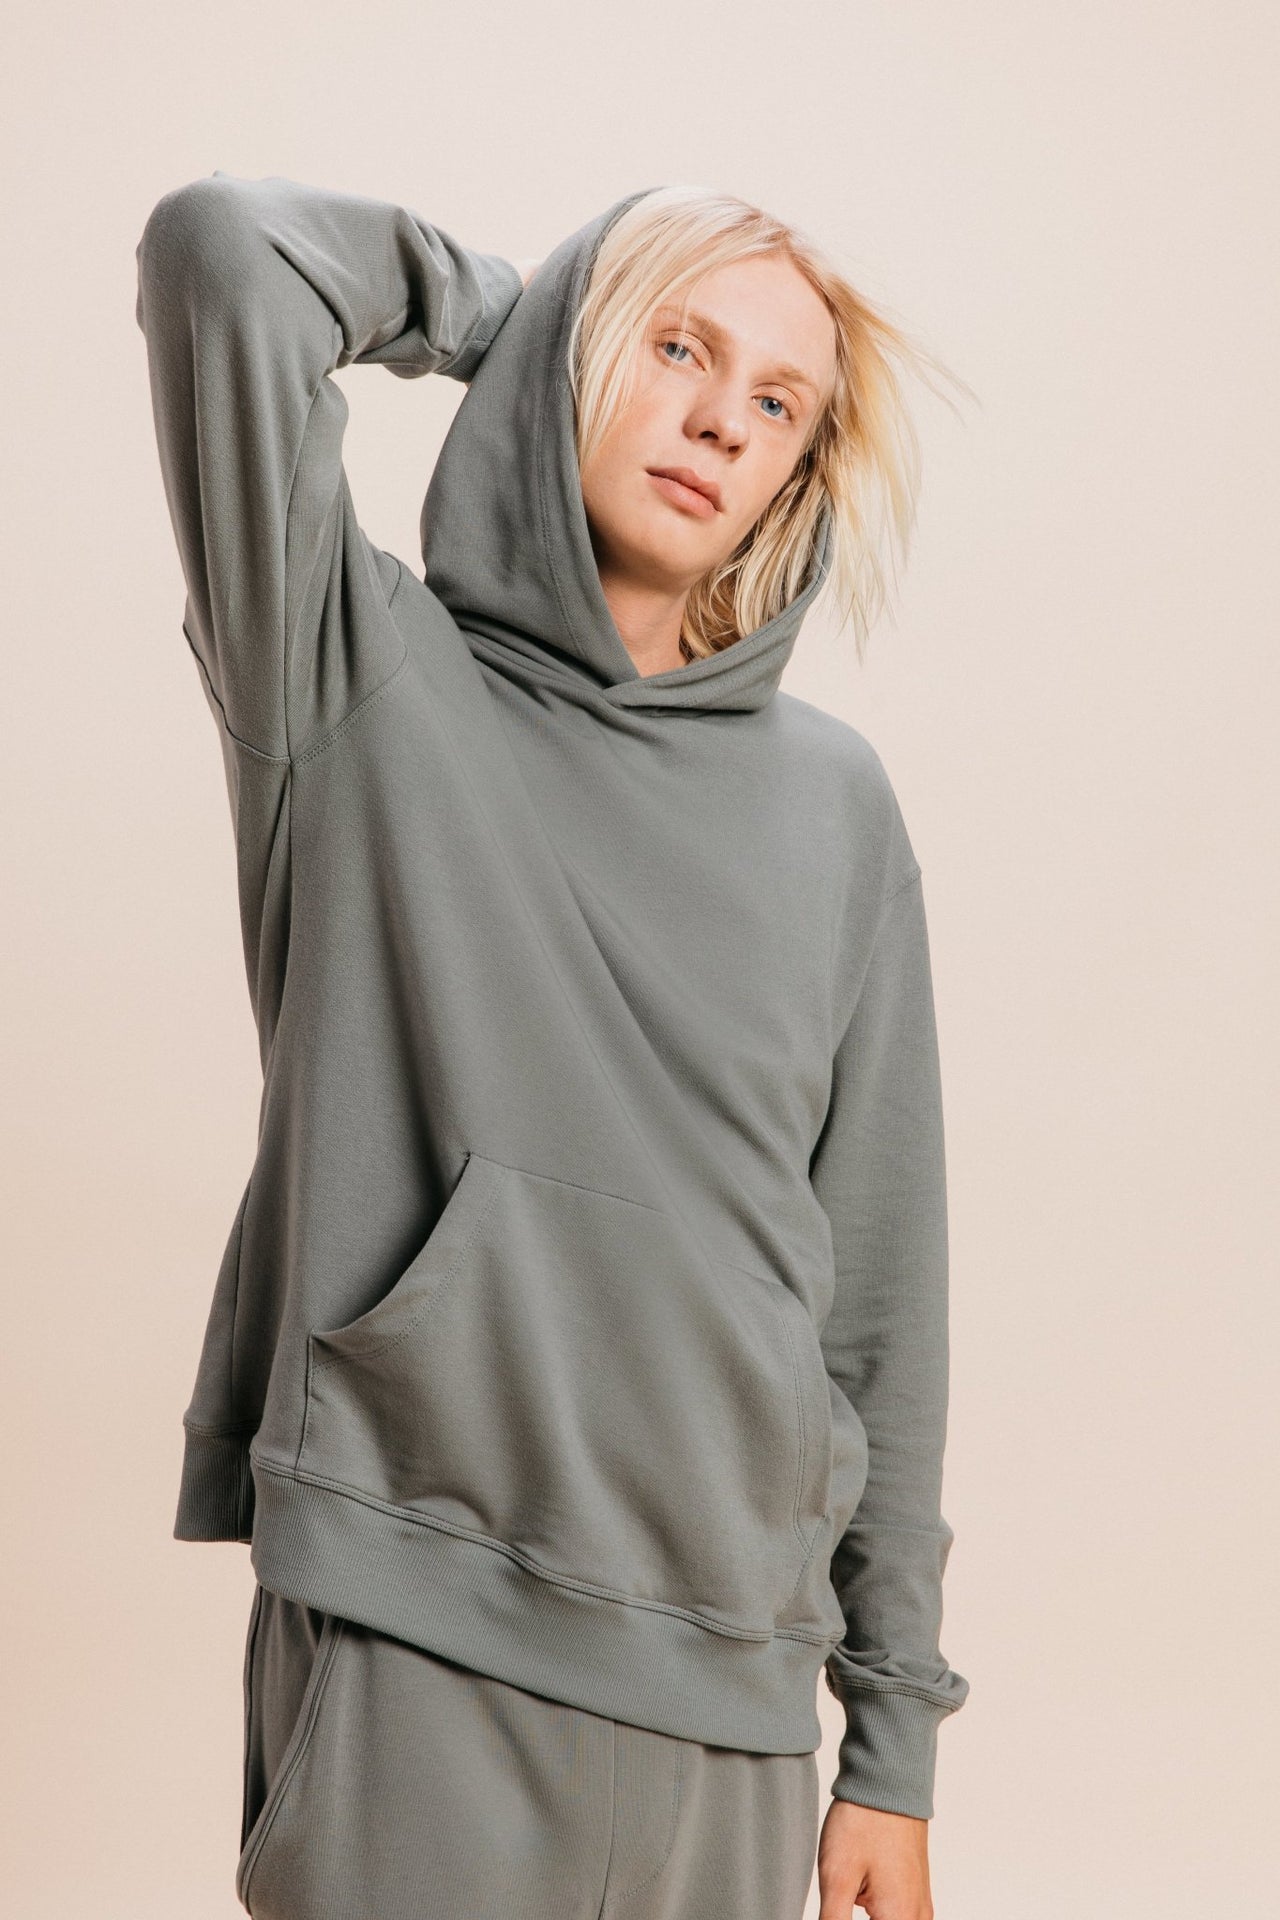 Classic SoftCore Hoodie in Sage